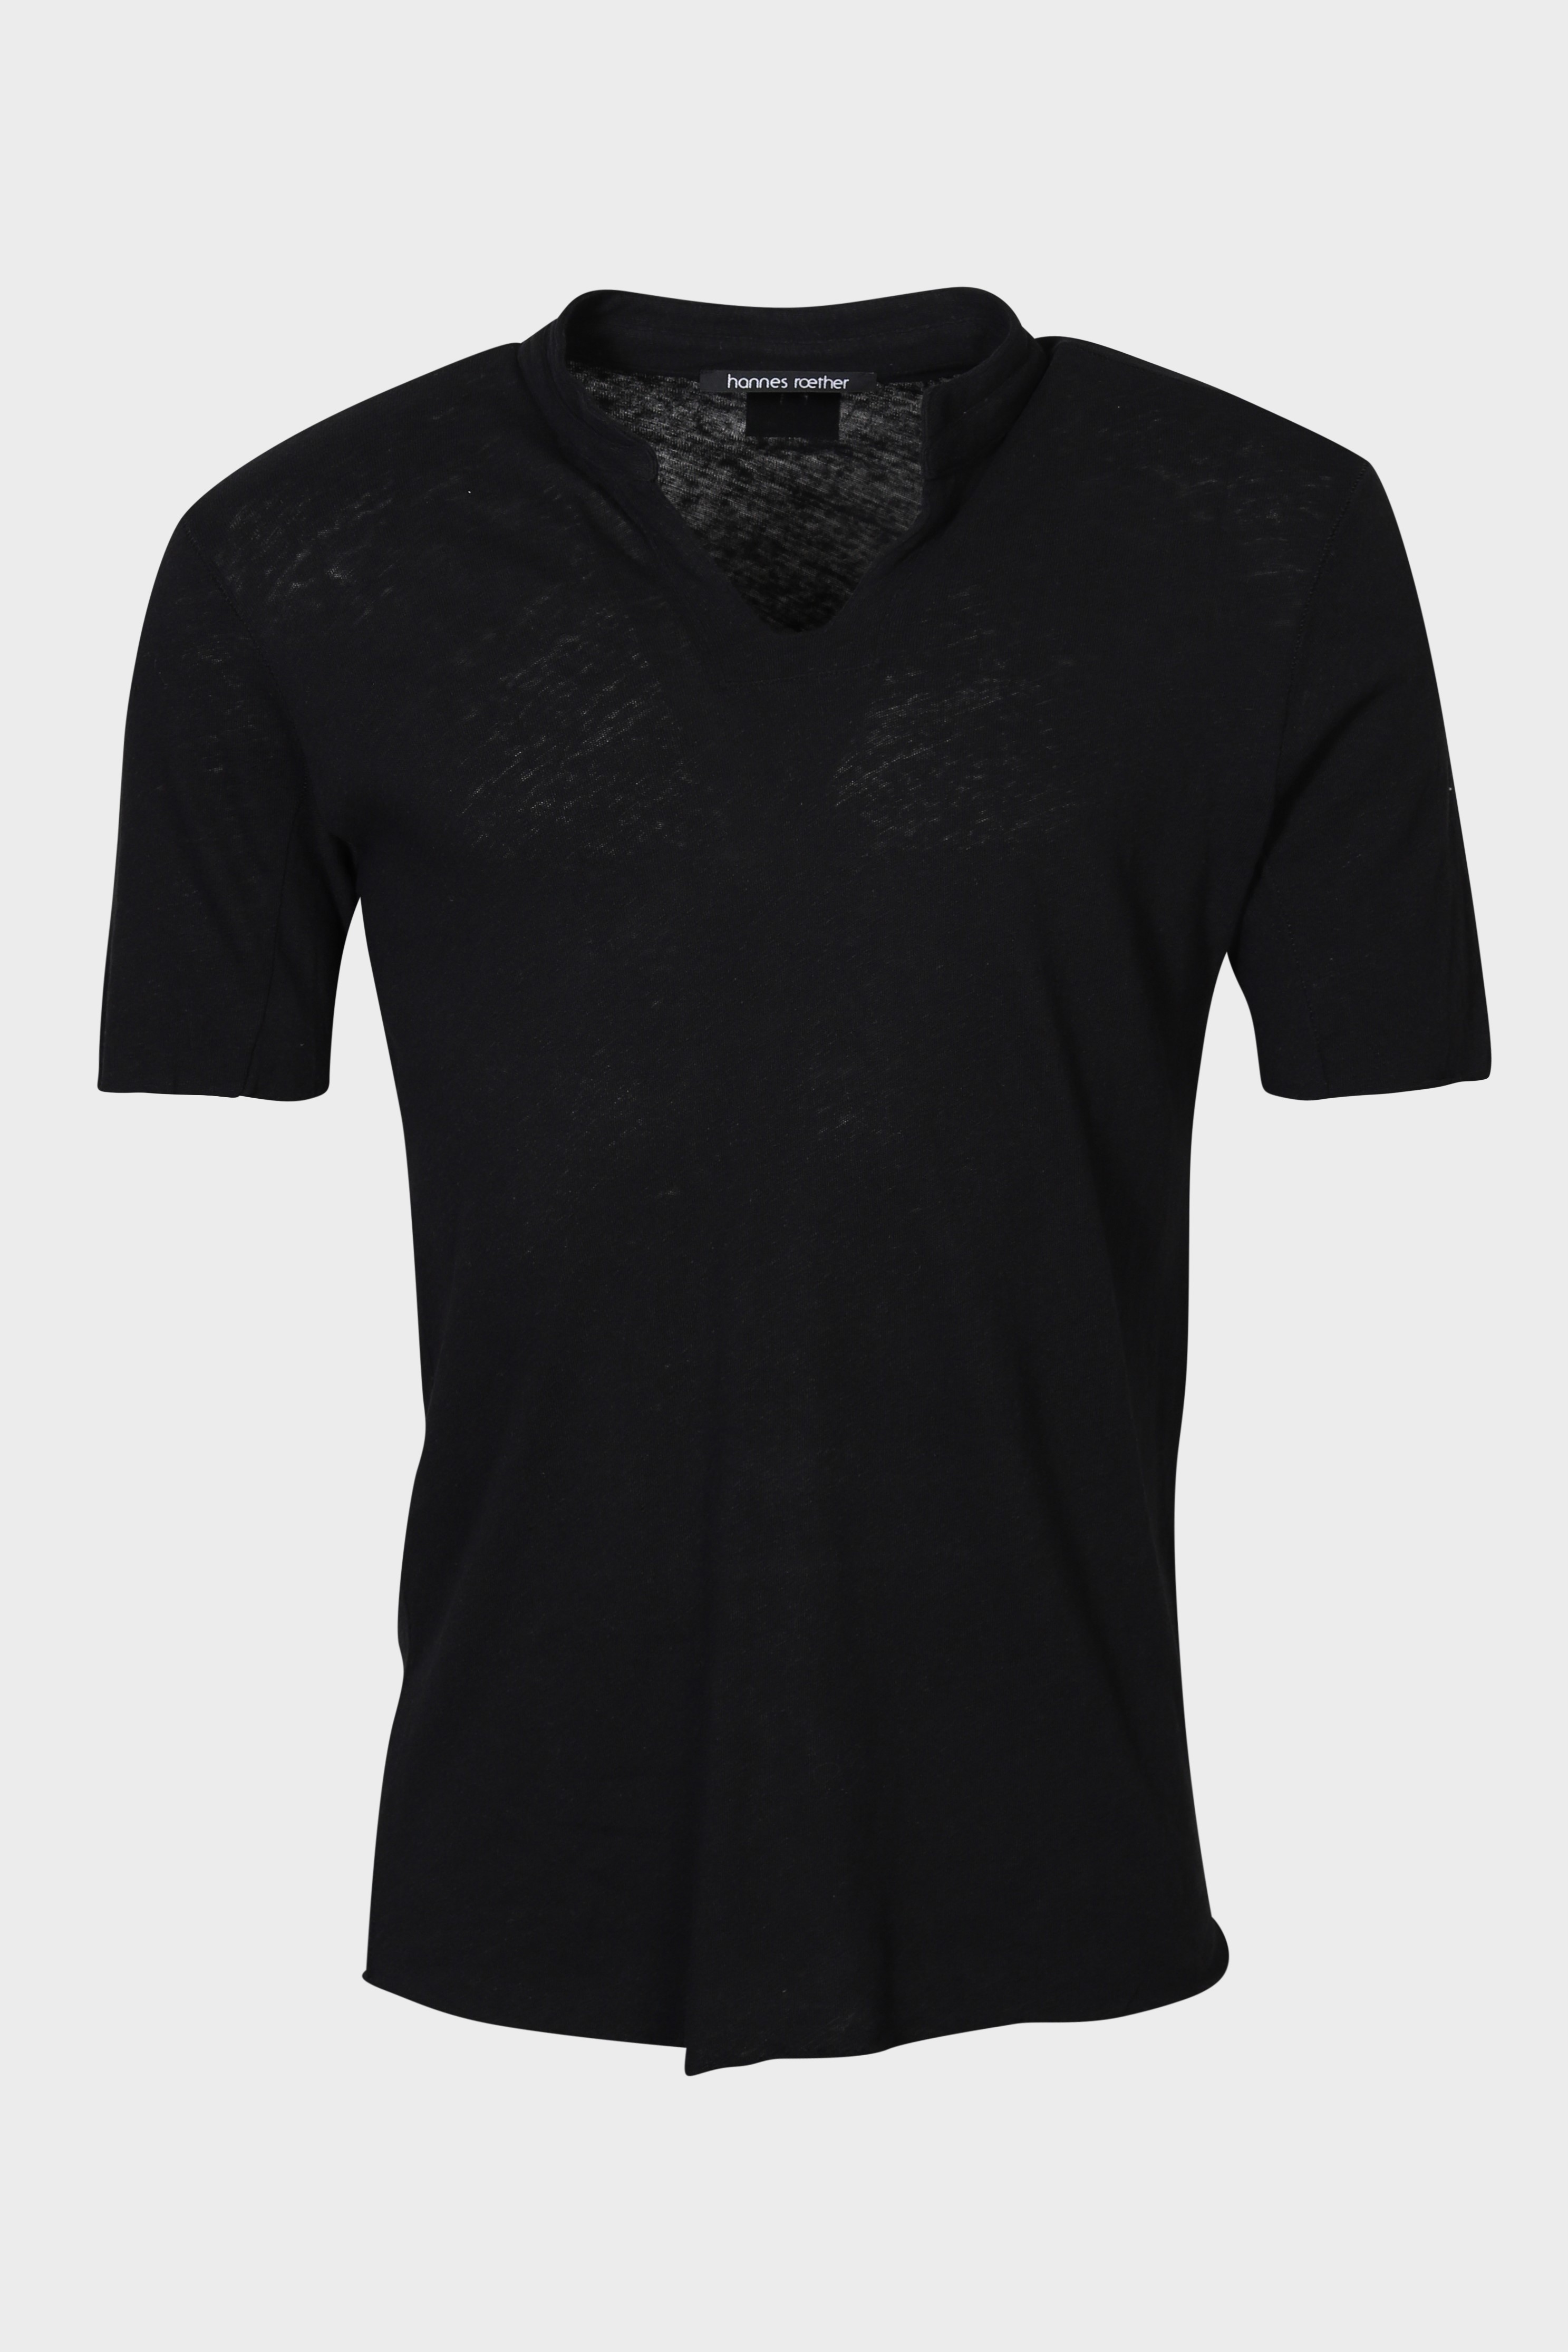 HANNES ROETHER Cotton Linen T-Shirt in Black